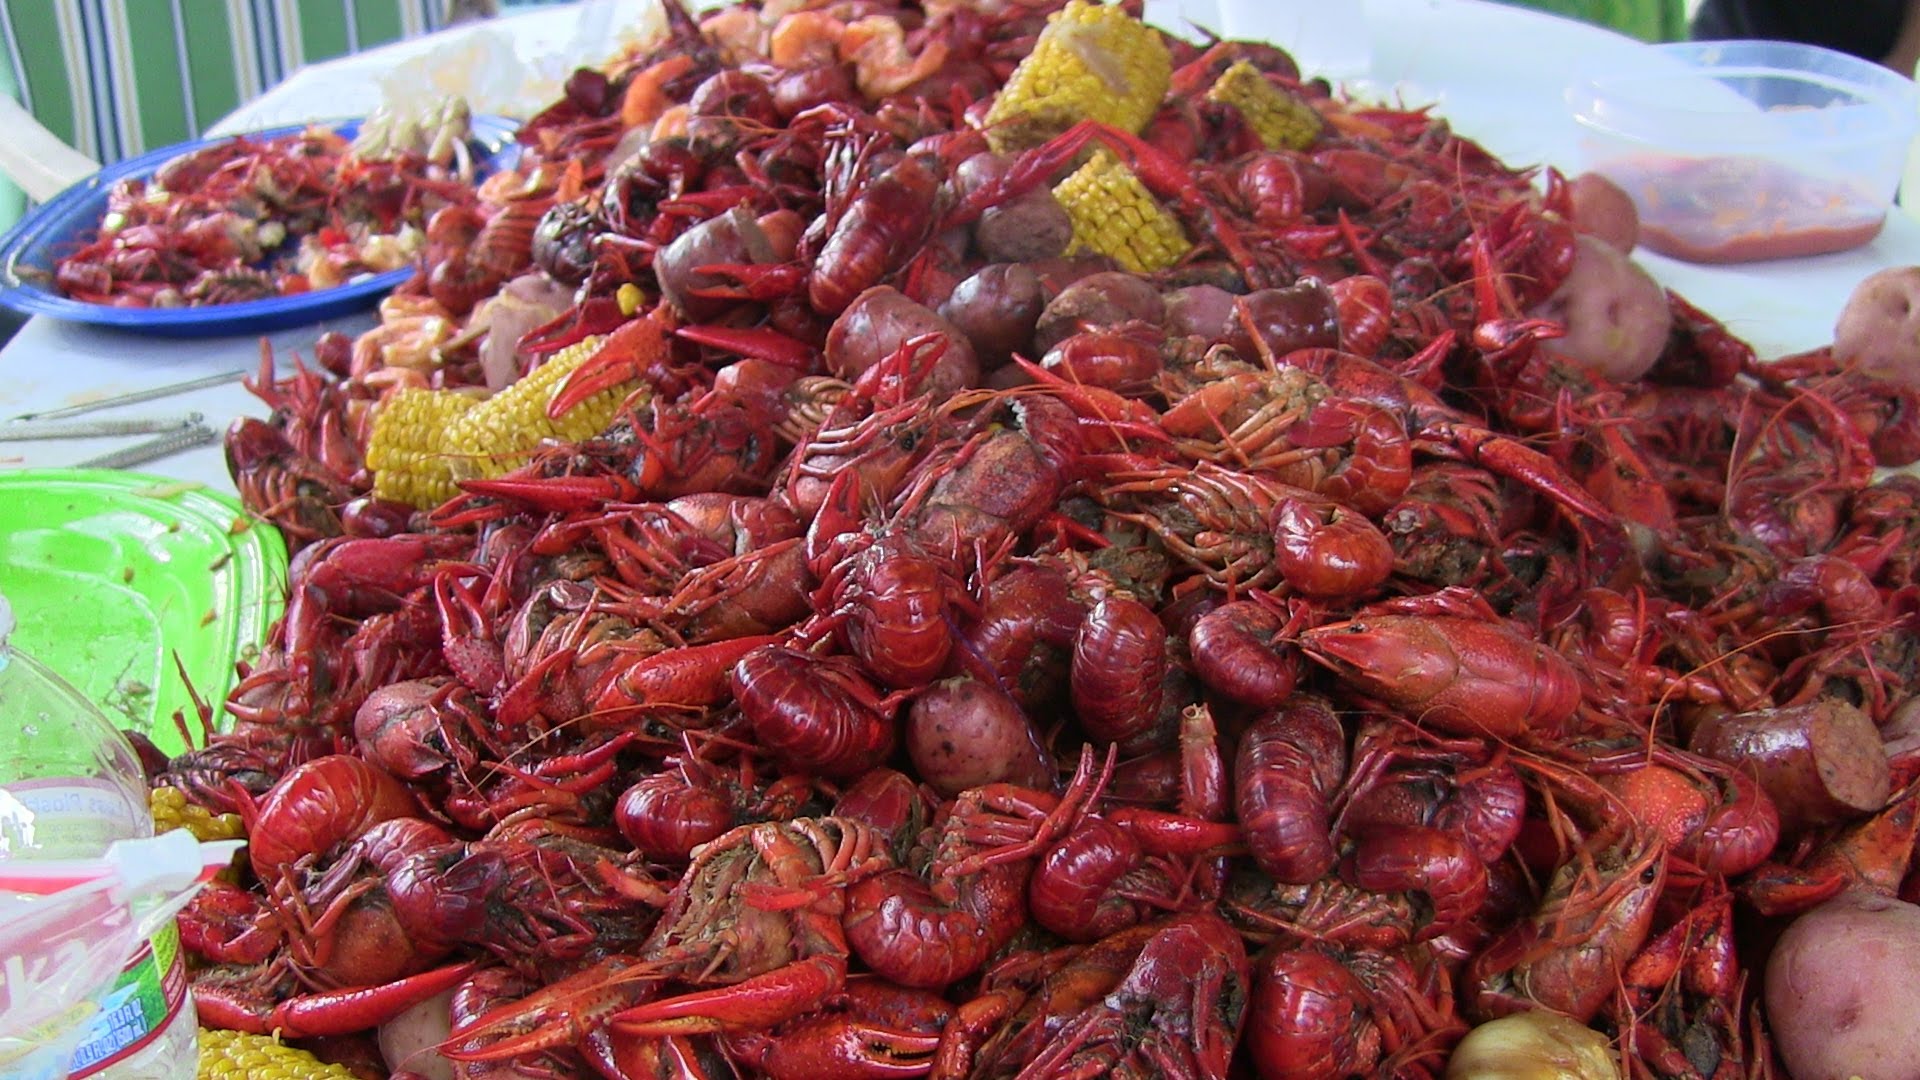 Punch Bowl Social's Annual Crawfish Boil | Austin Food Events